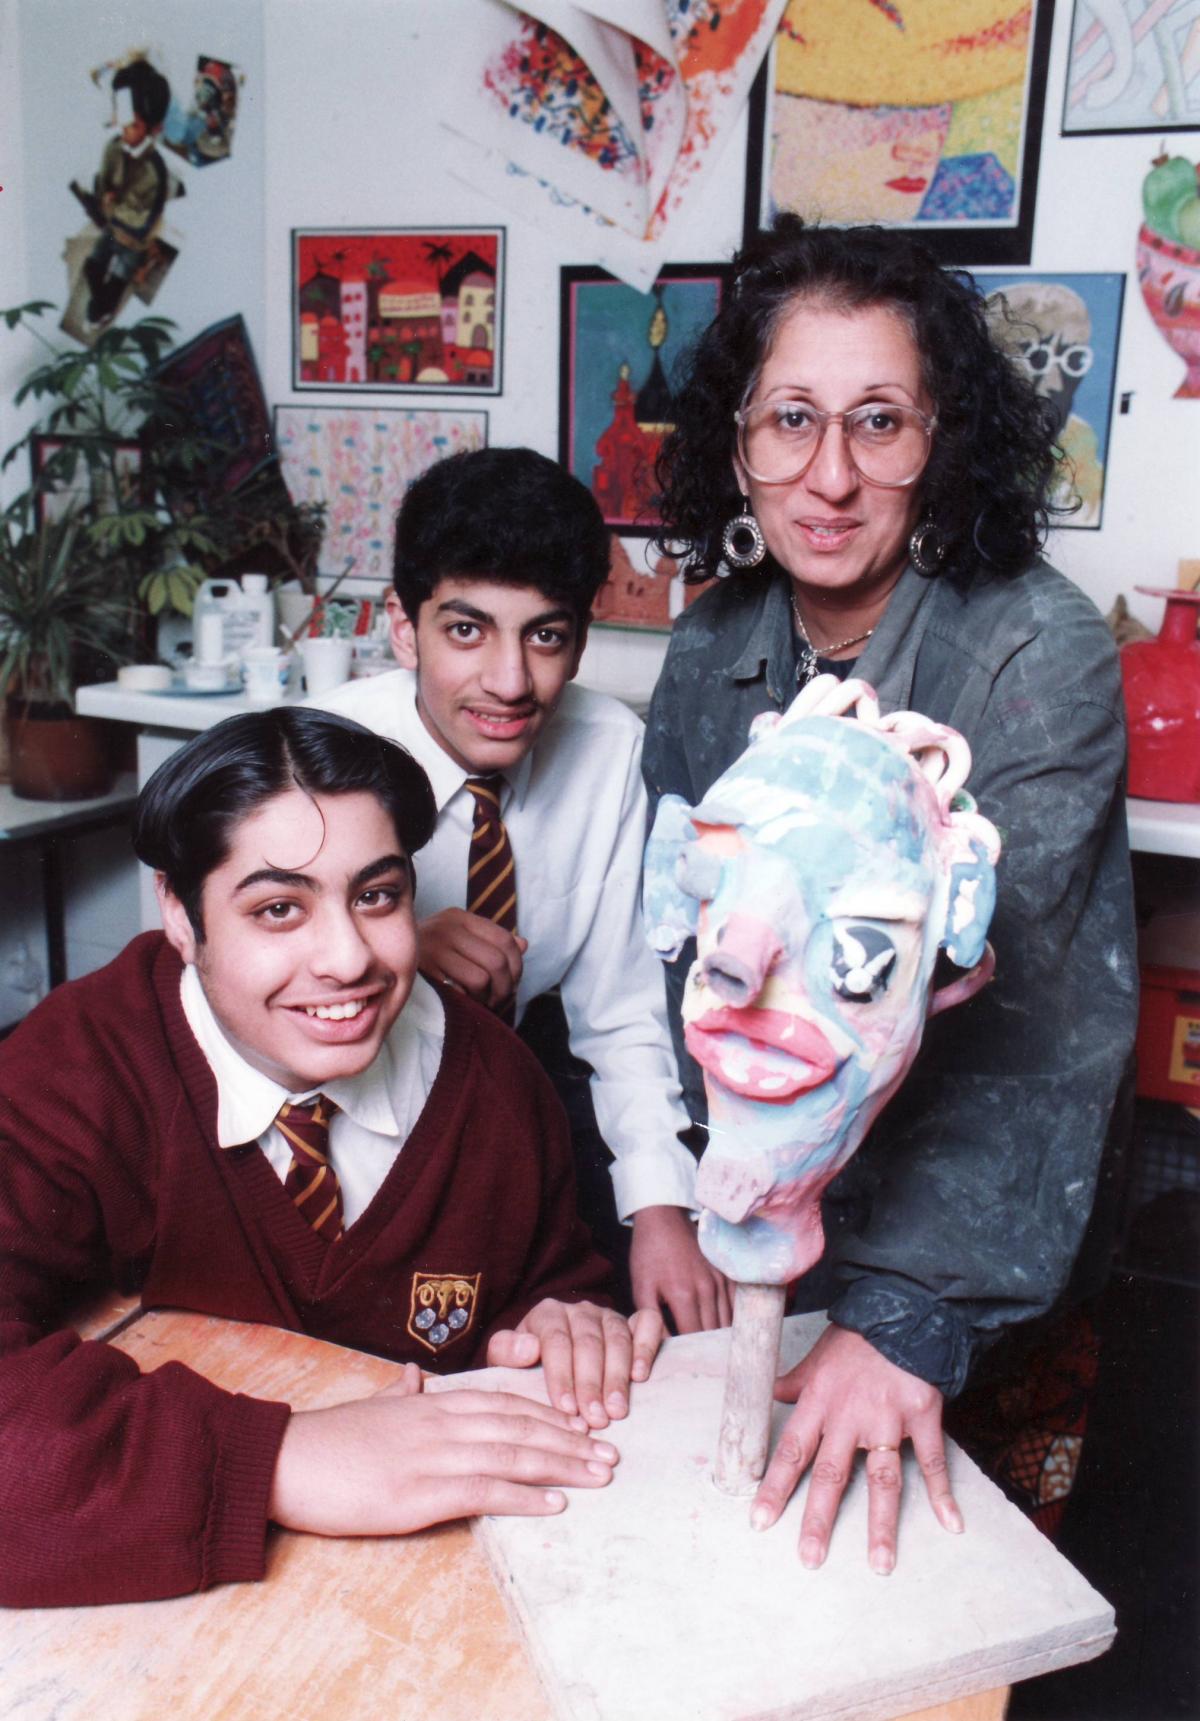 Belle Vue Boys' School pupils with an art project in 1994